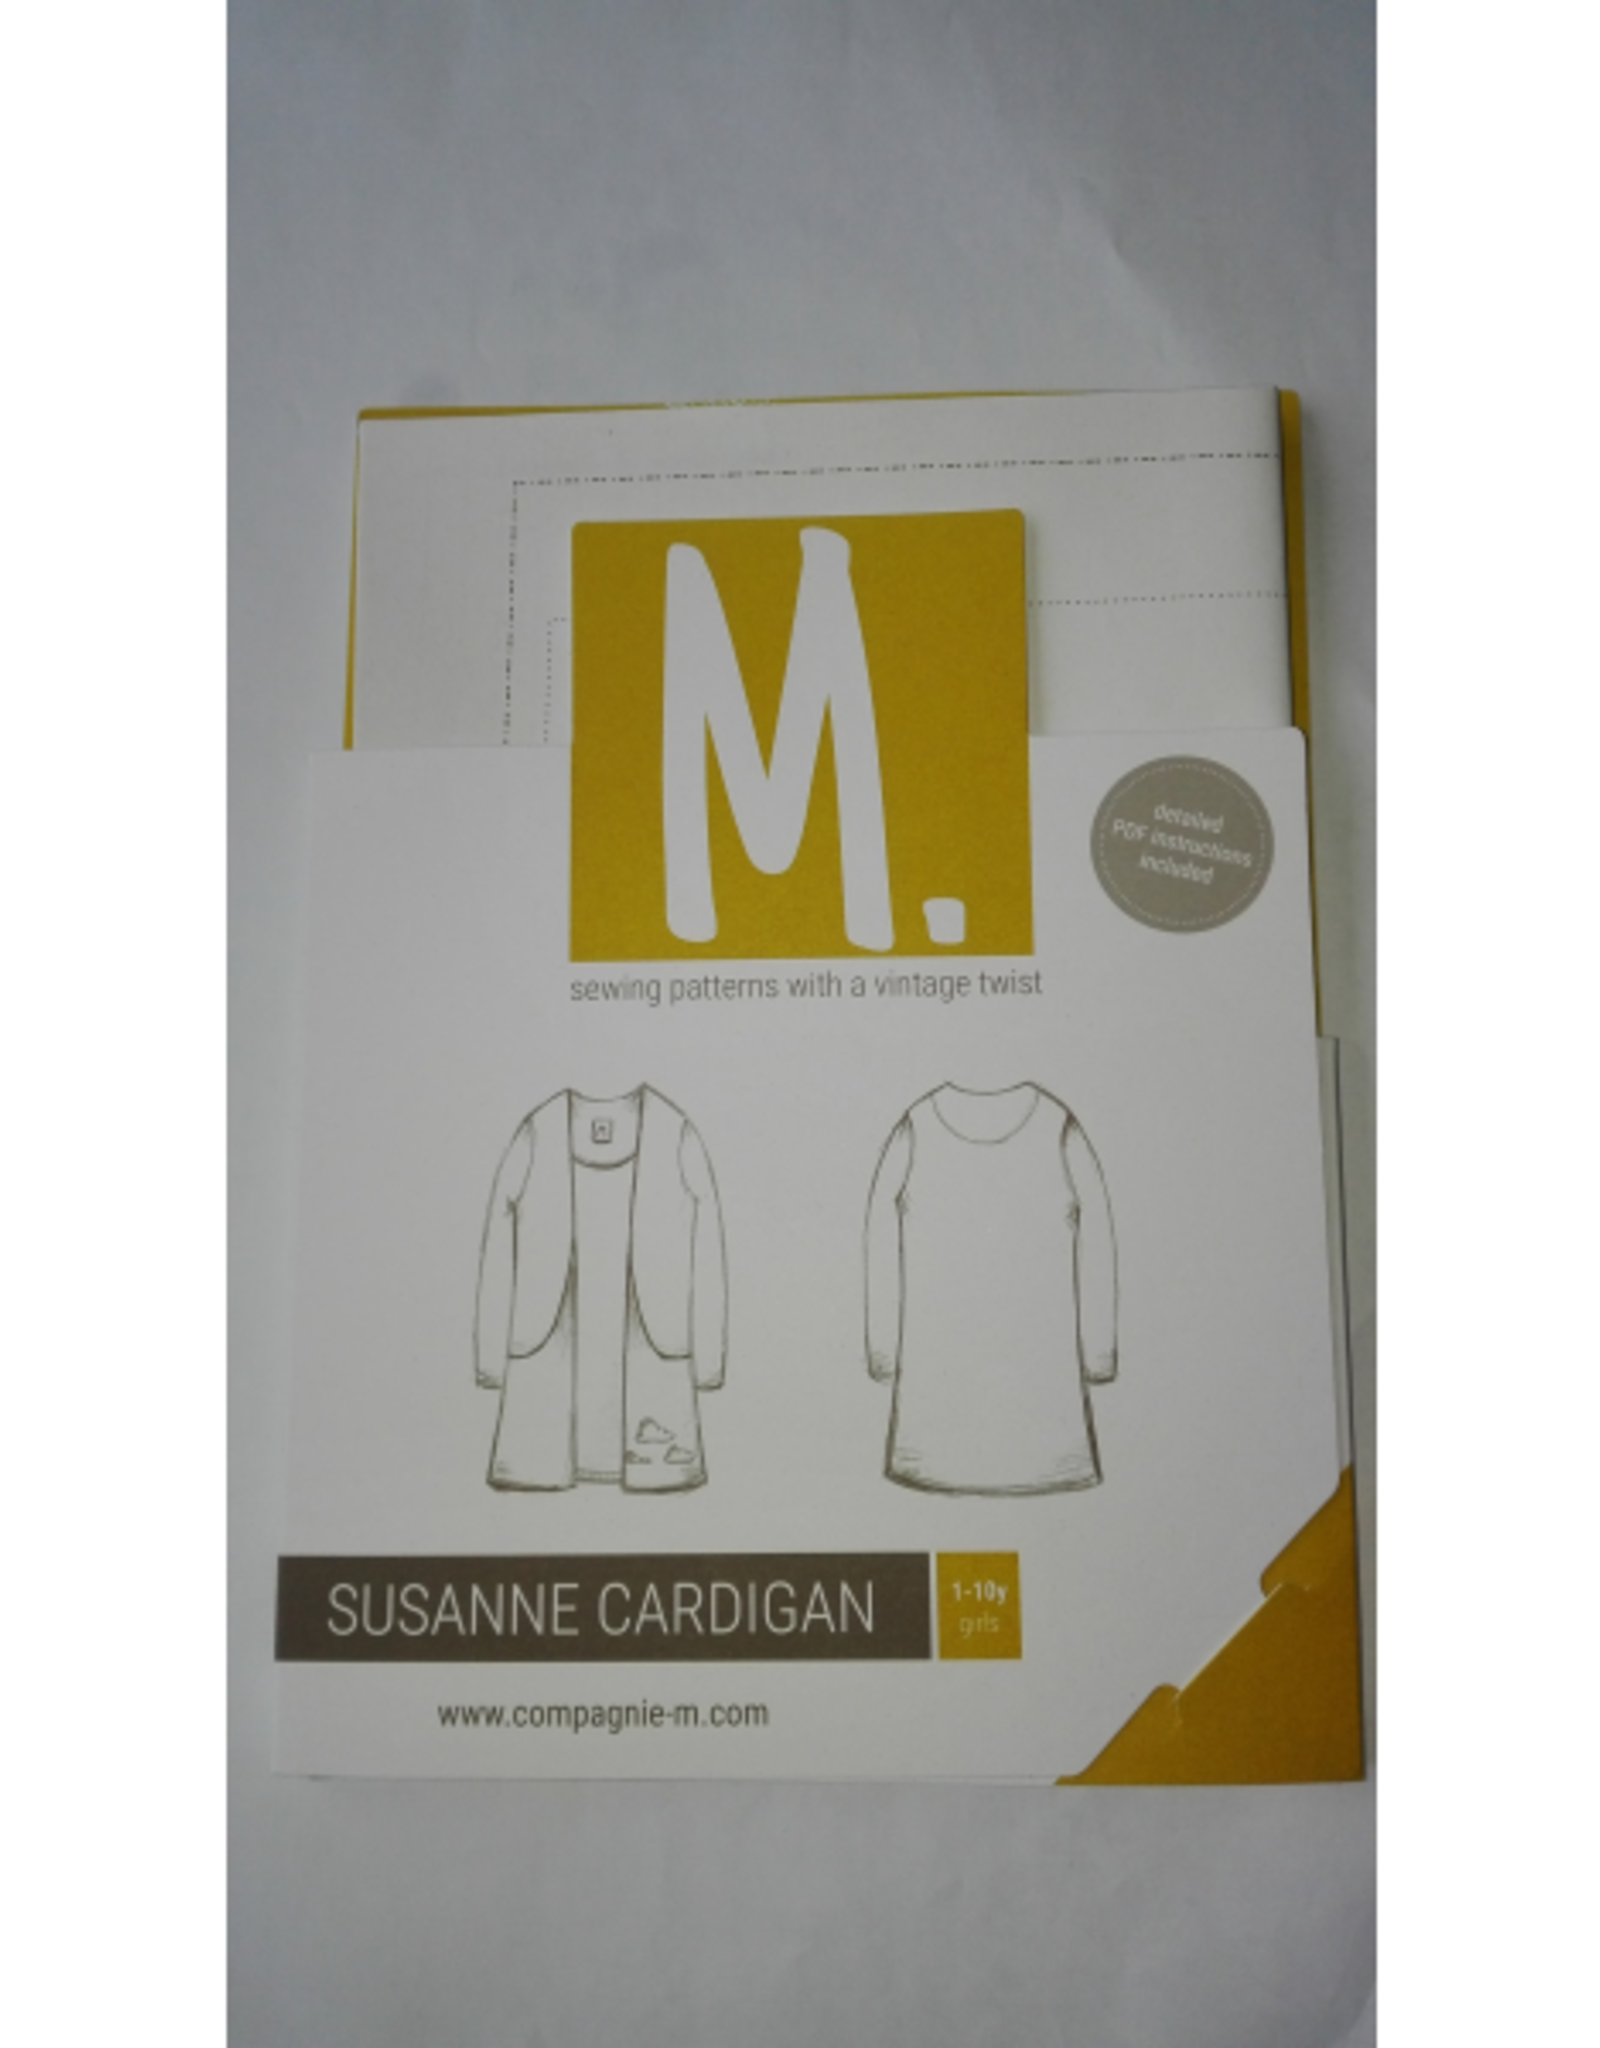 Compagnie M Compagnie M Suzanne Cardigan teens and woman